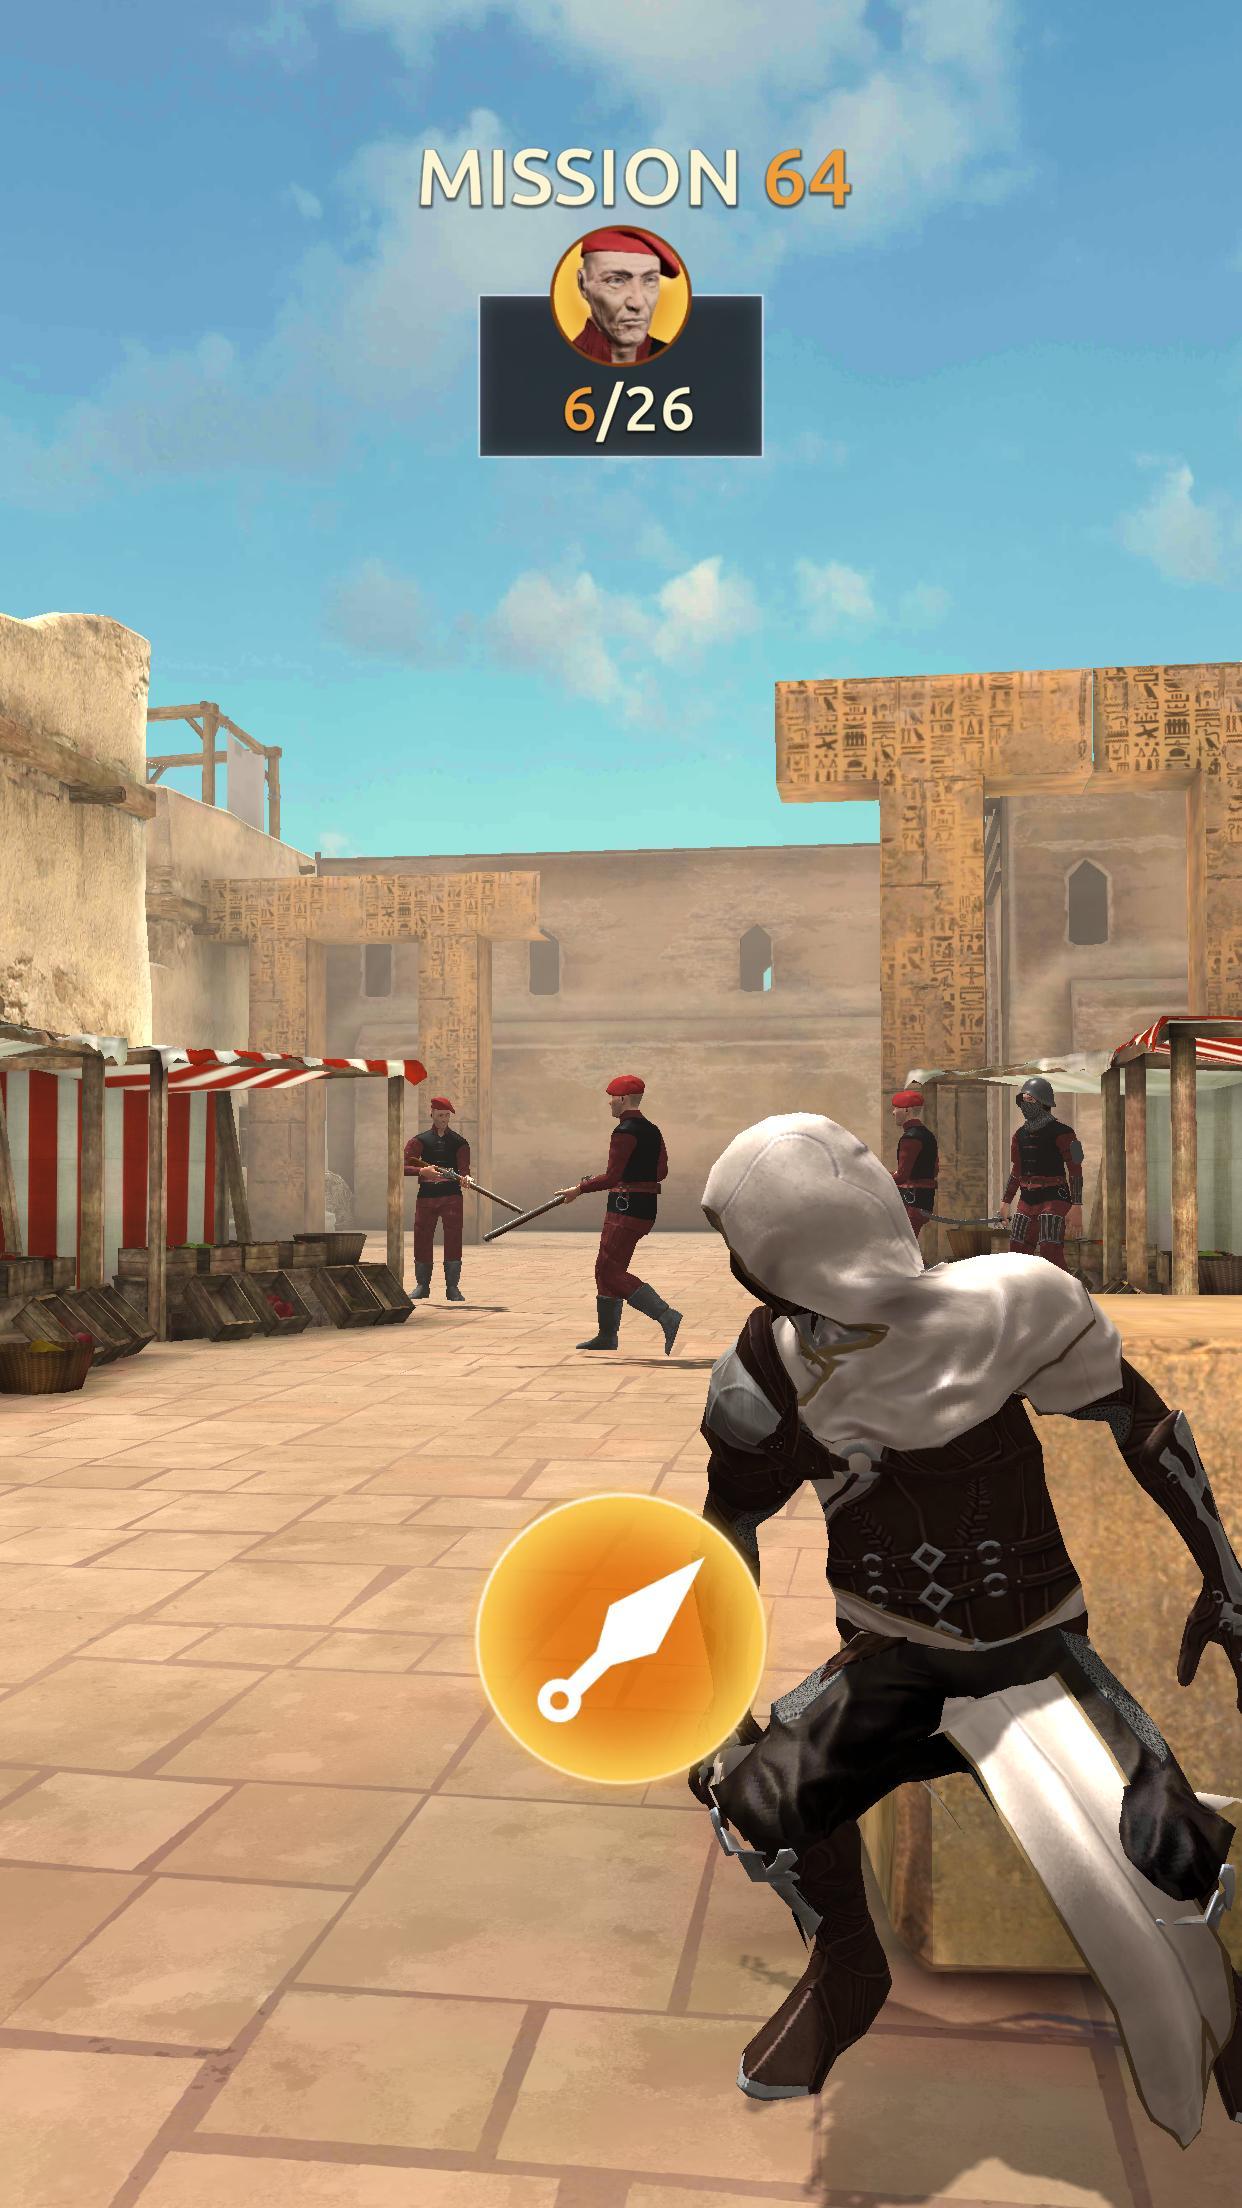 Free Assassins Creed III apk android APK Download For Android